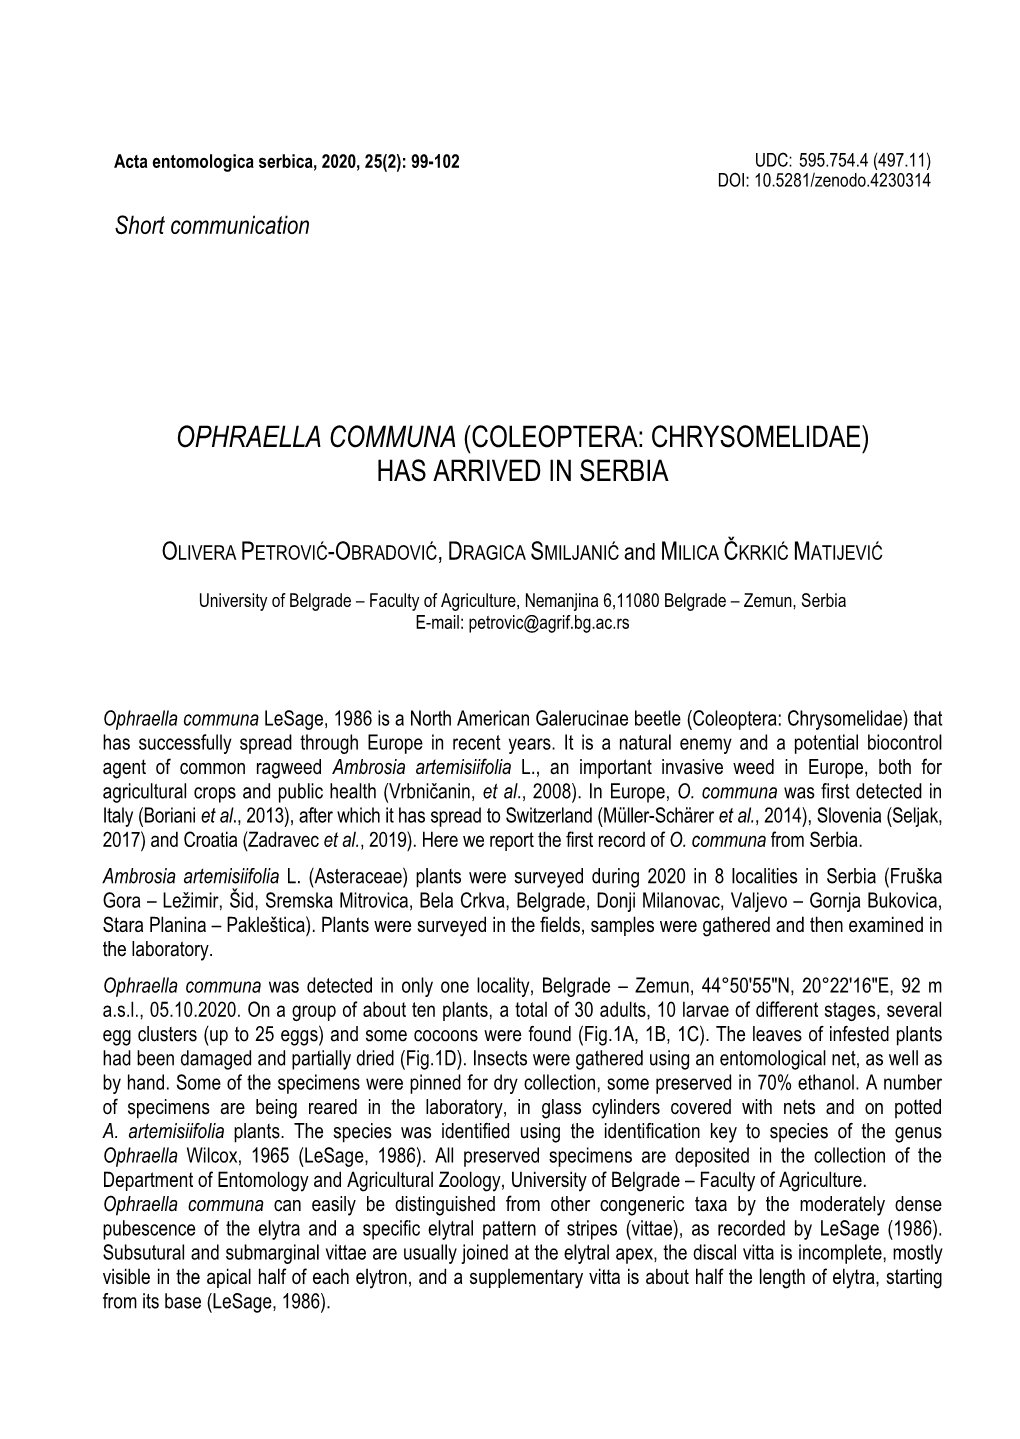 Ophraella Communa (Coleoptera: Chrysomelidae) Has Arrived in Serbia